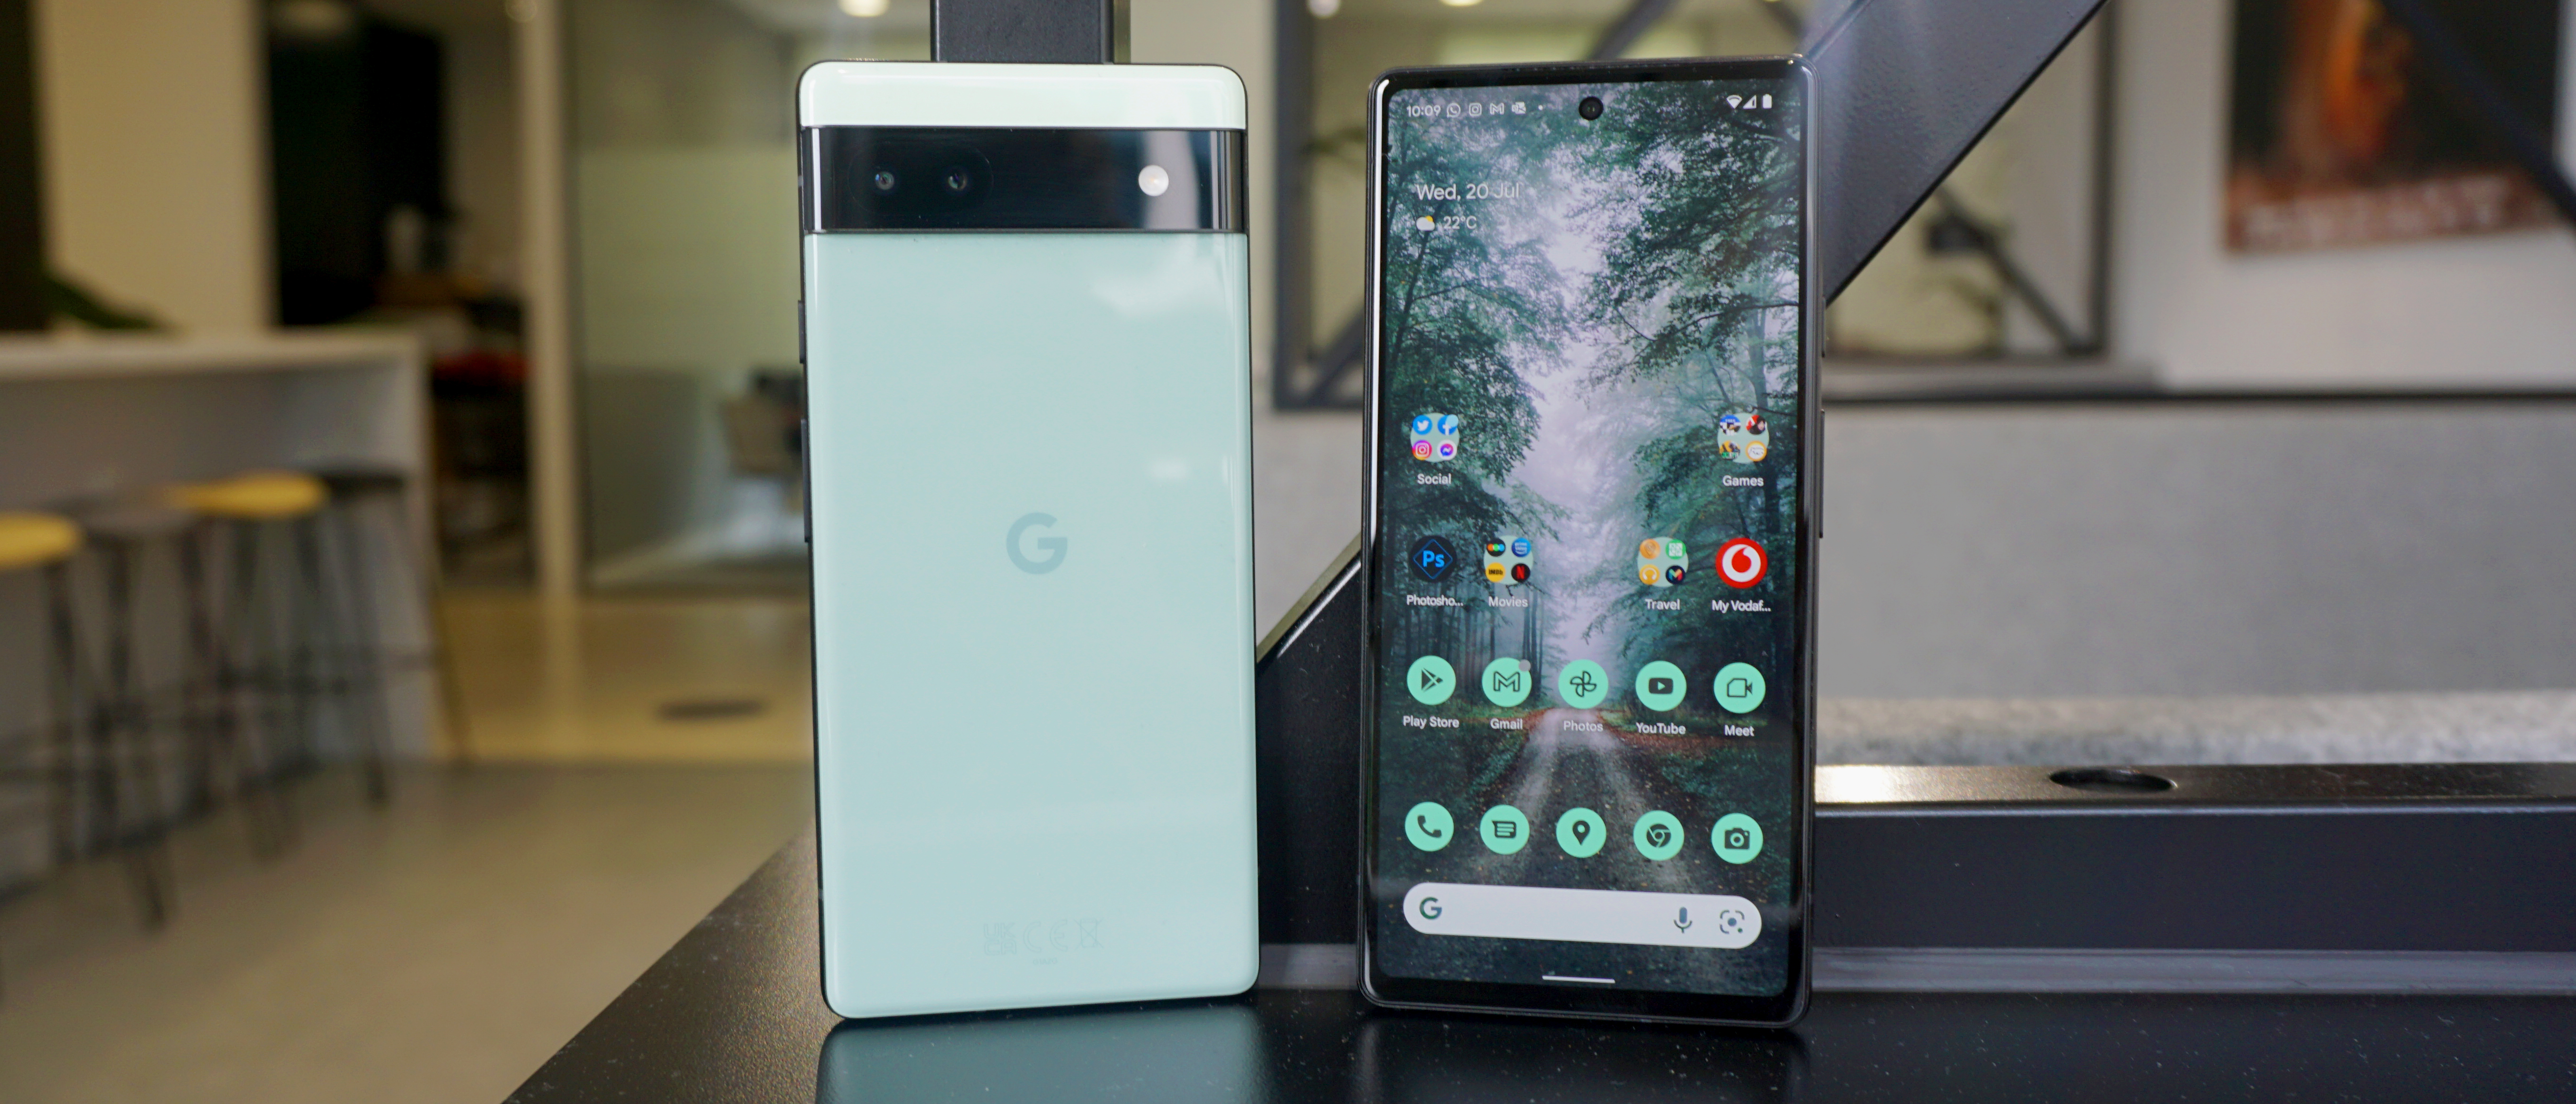 Google Pixel 6a review: A new bar for mid-range phones